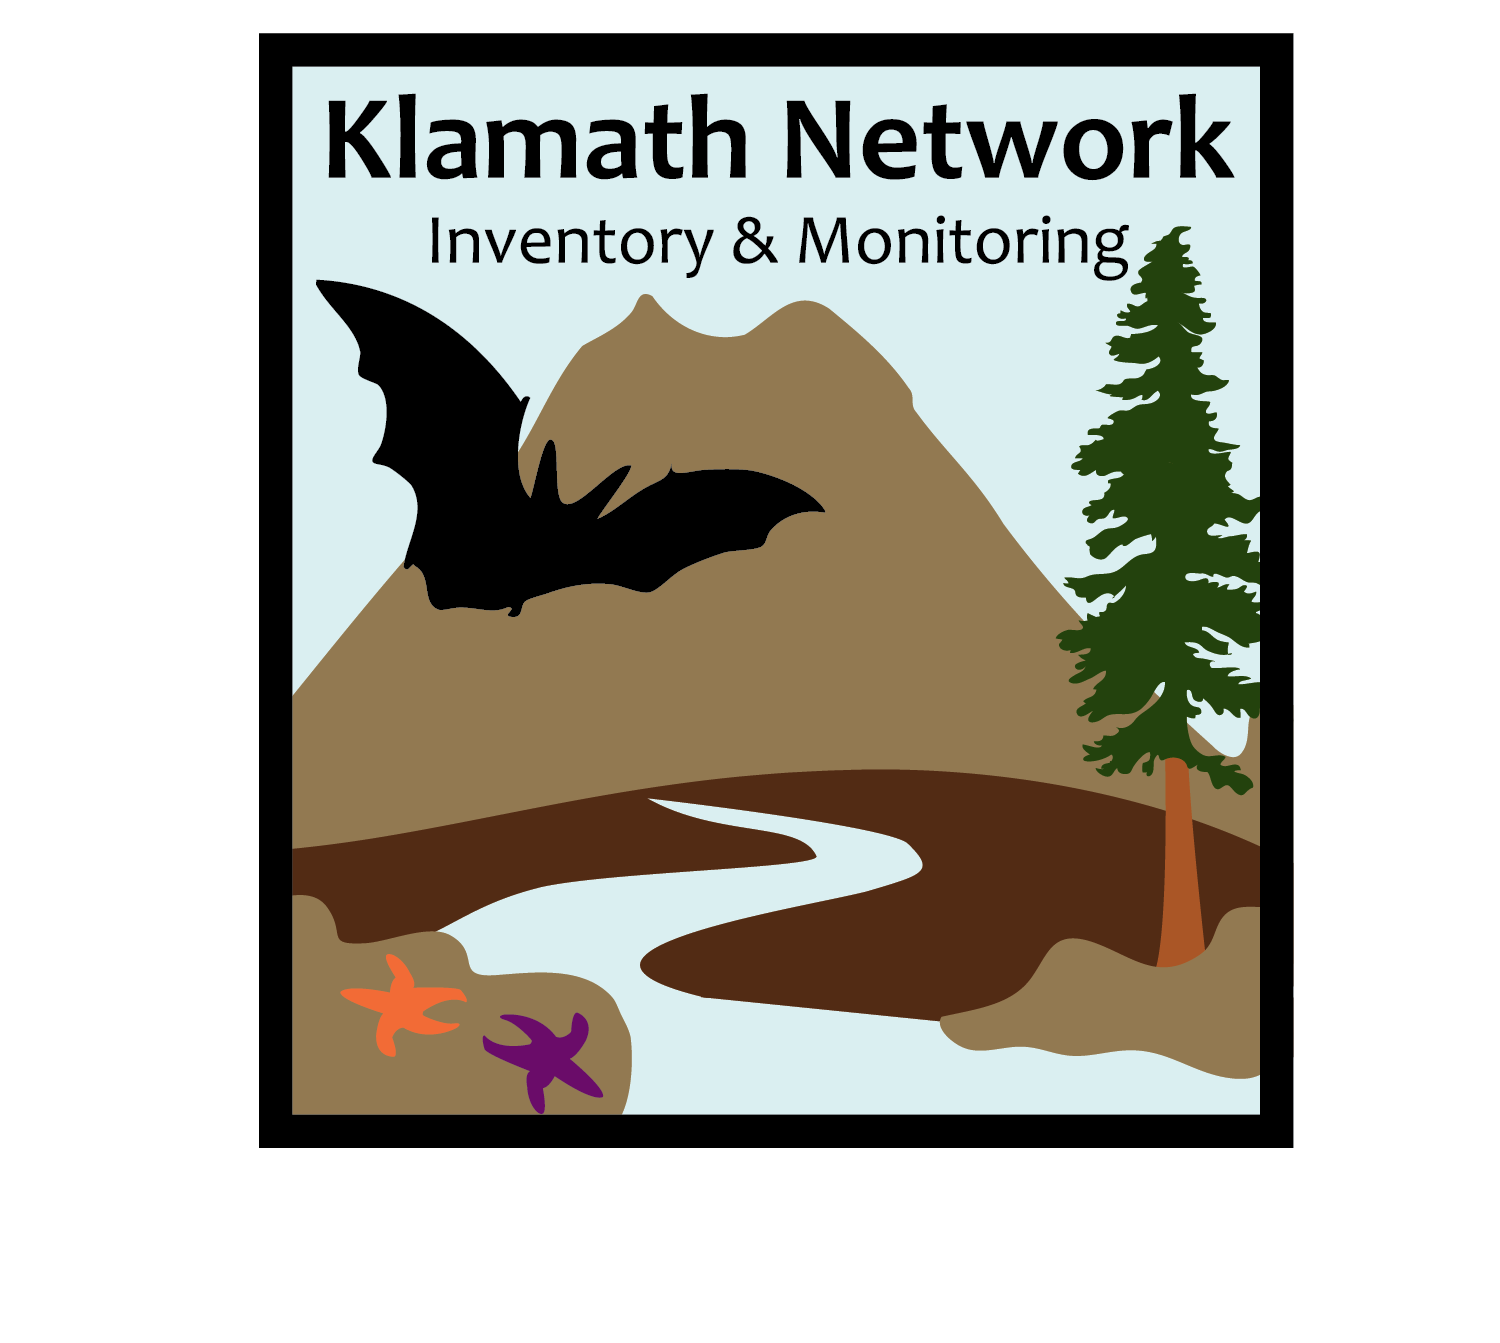 Logo of the Klamath Inventory and Monitoring Network